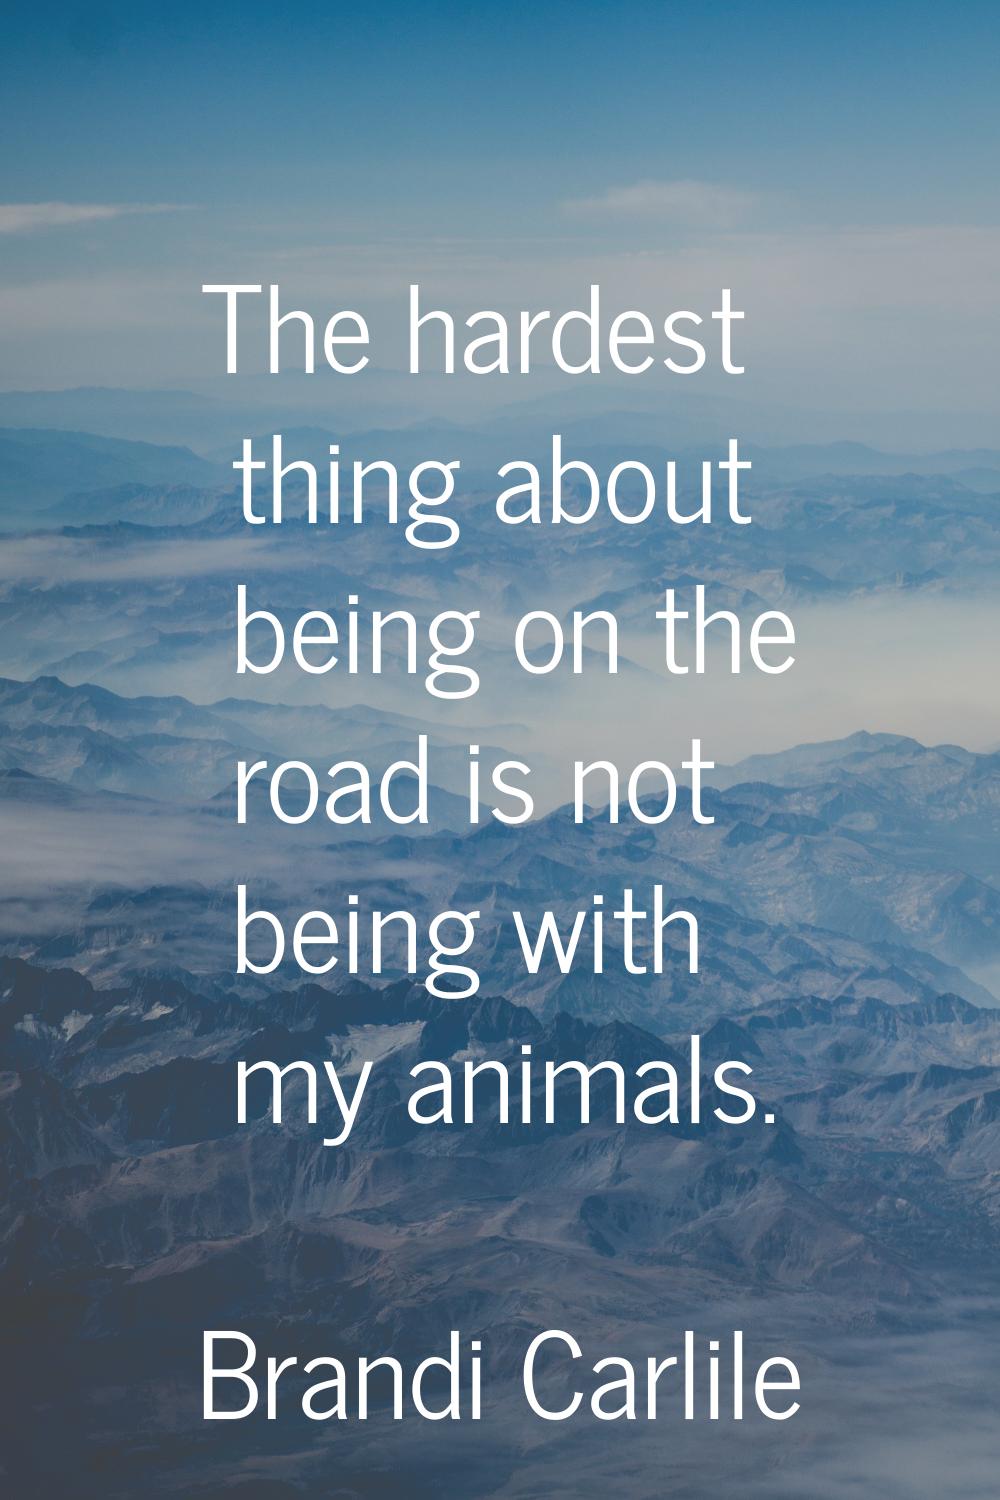 The hardest thing about being on the road is not being with my animals.